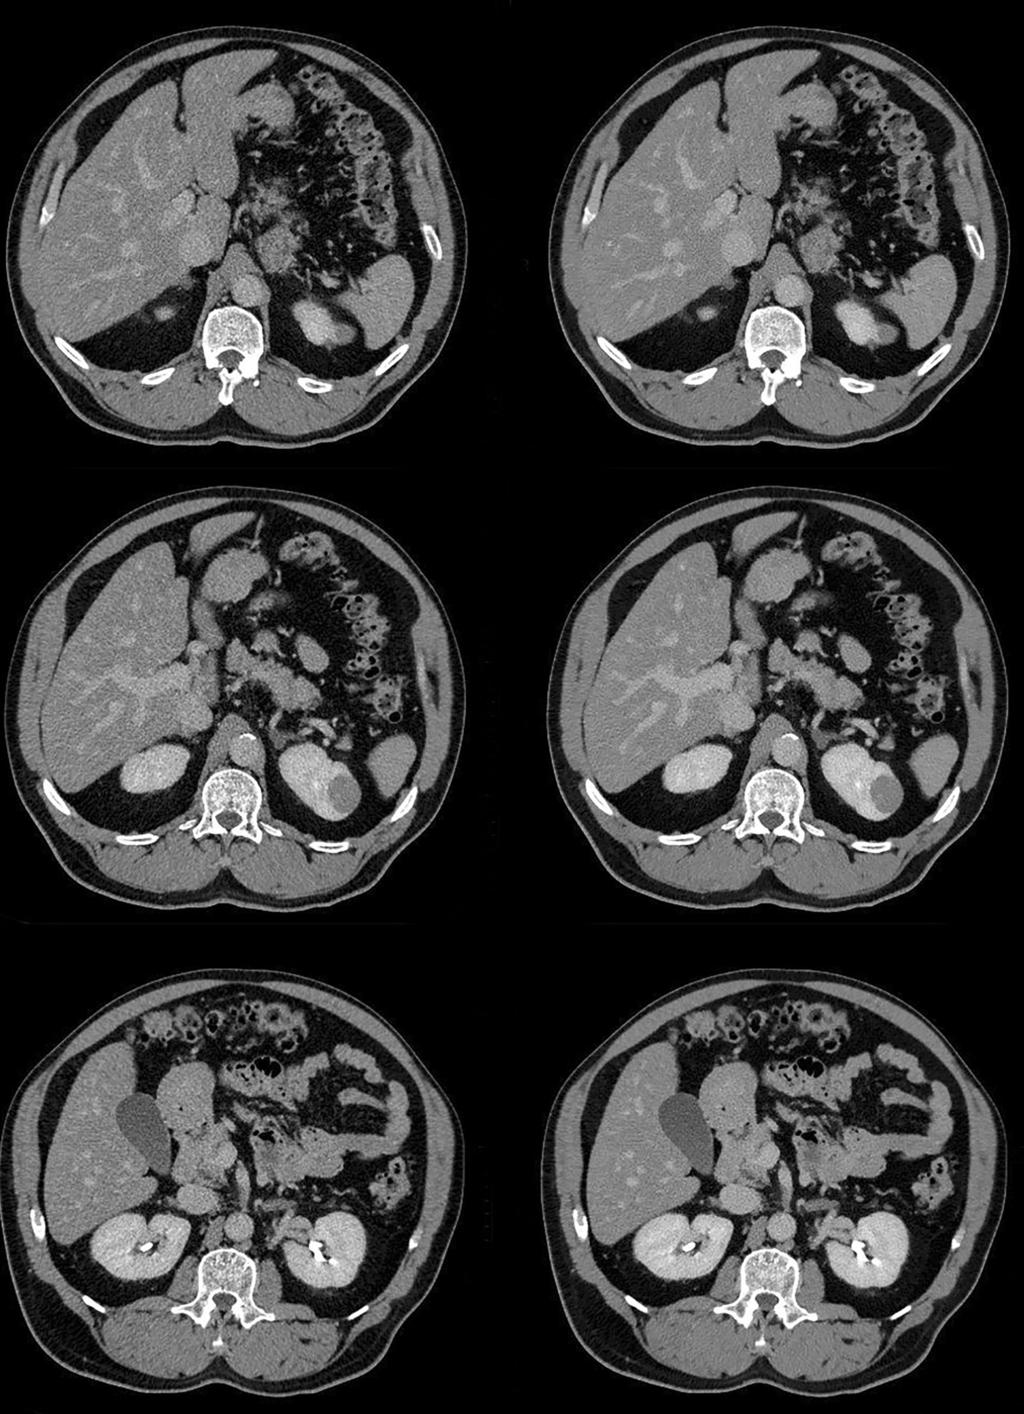 Fig. 4. Axial CT images of the abdomen obtained in an 87-year-old man.